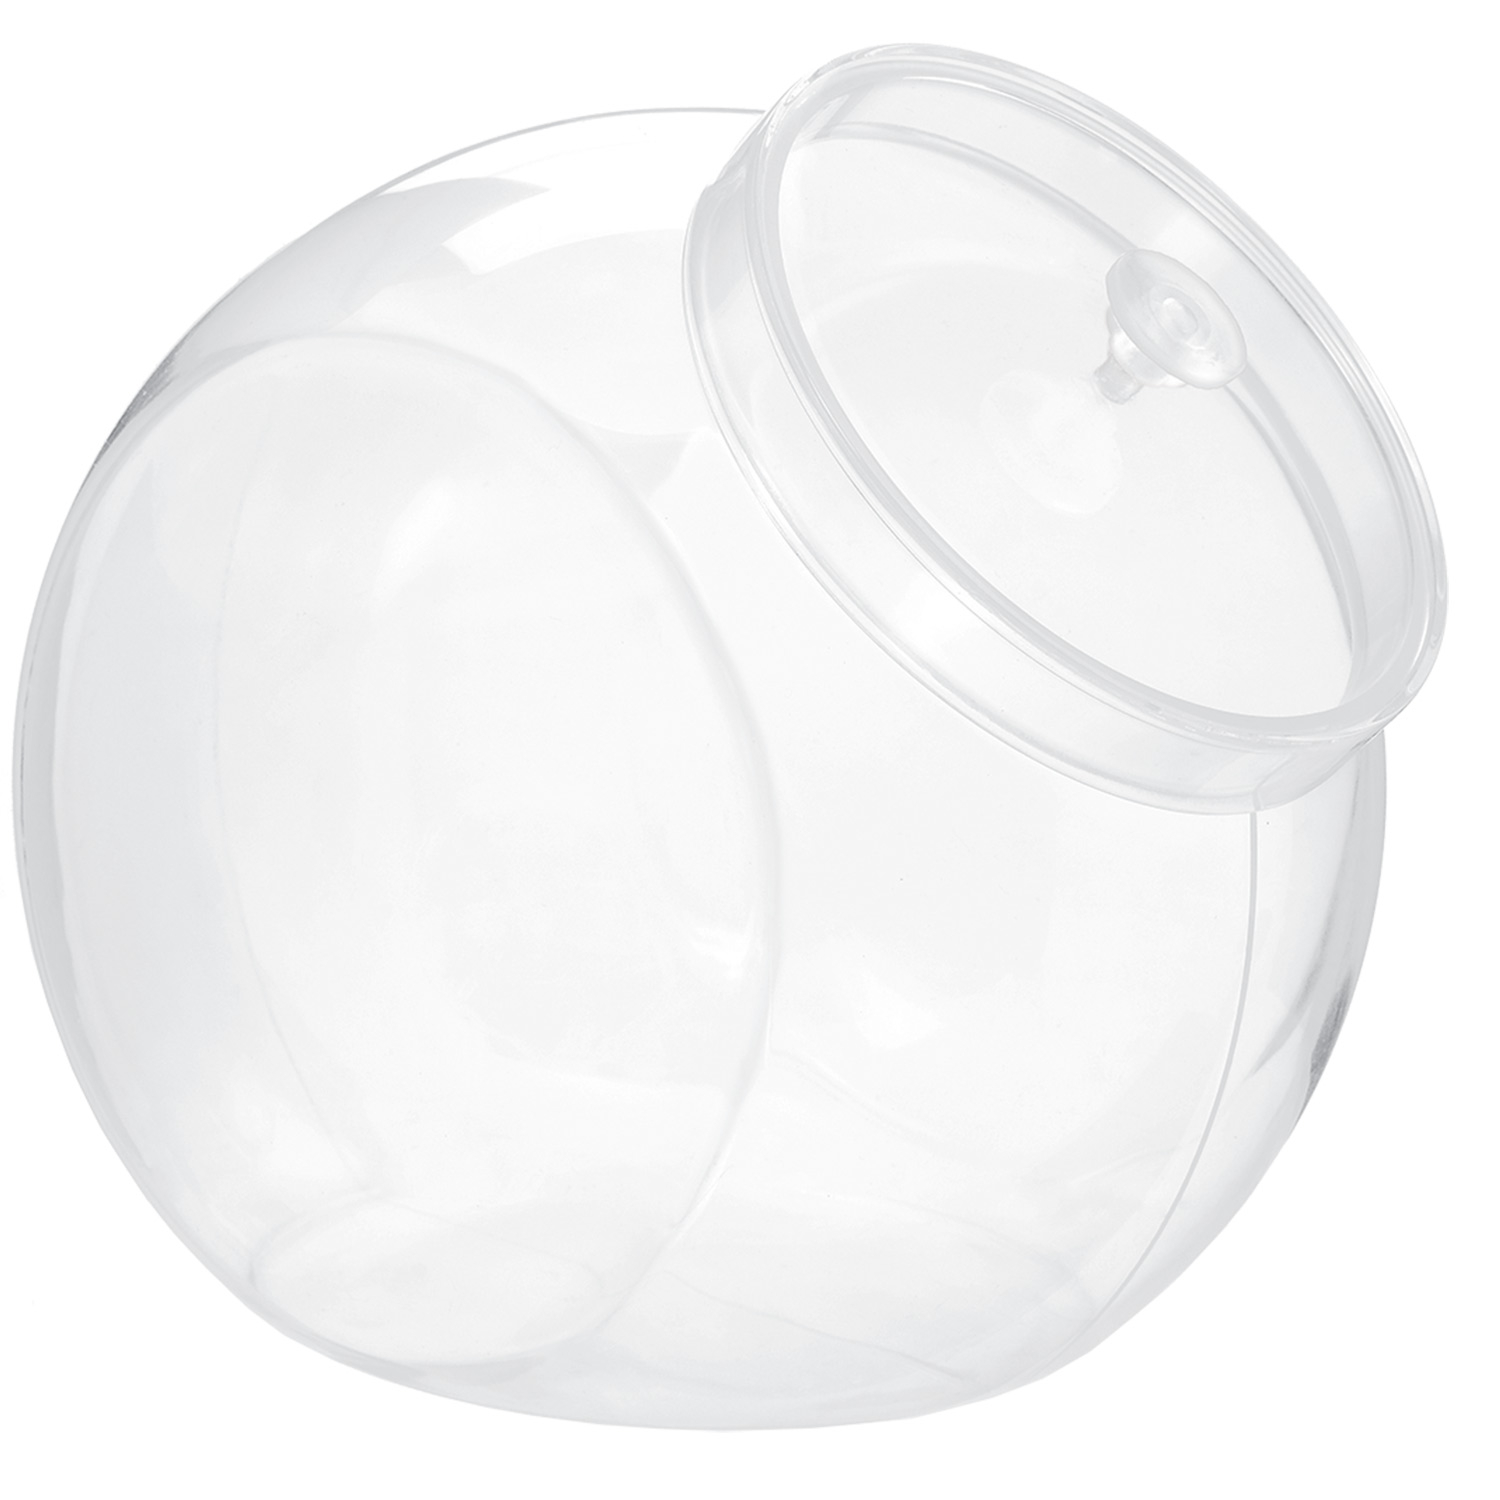 Round Plastic Candy Container